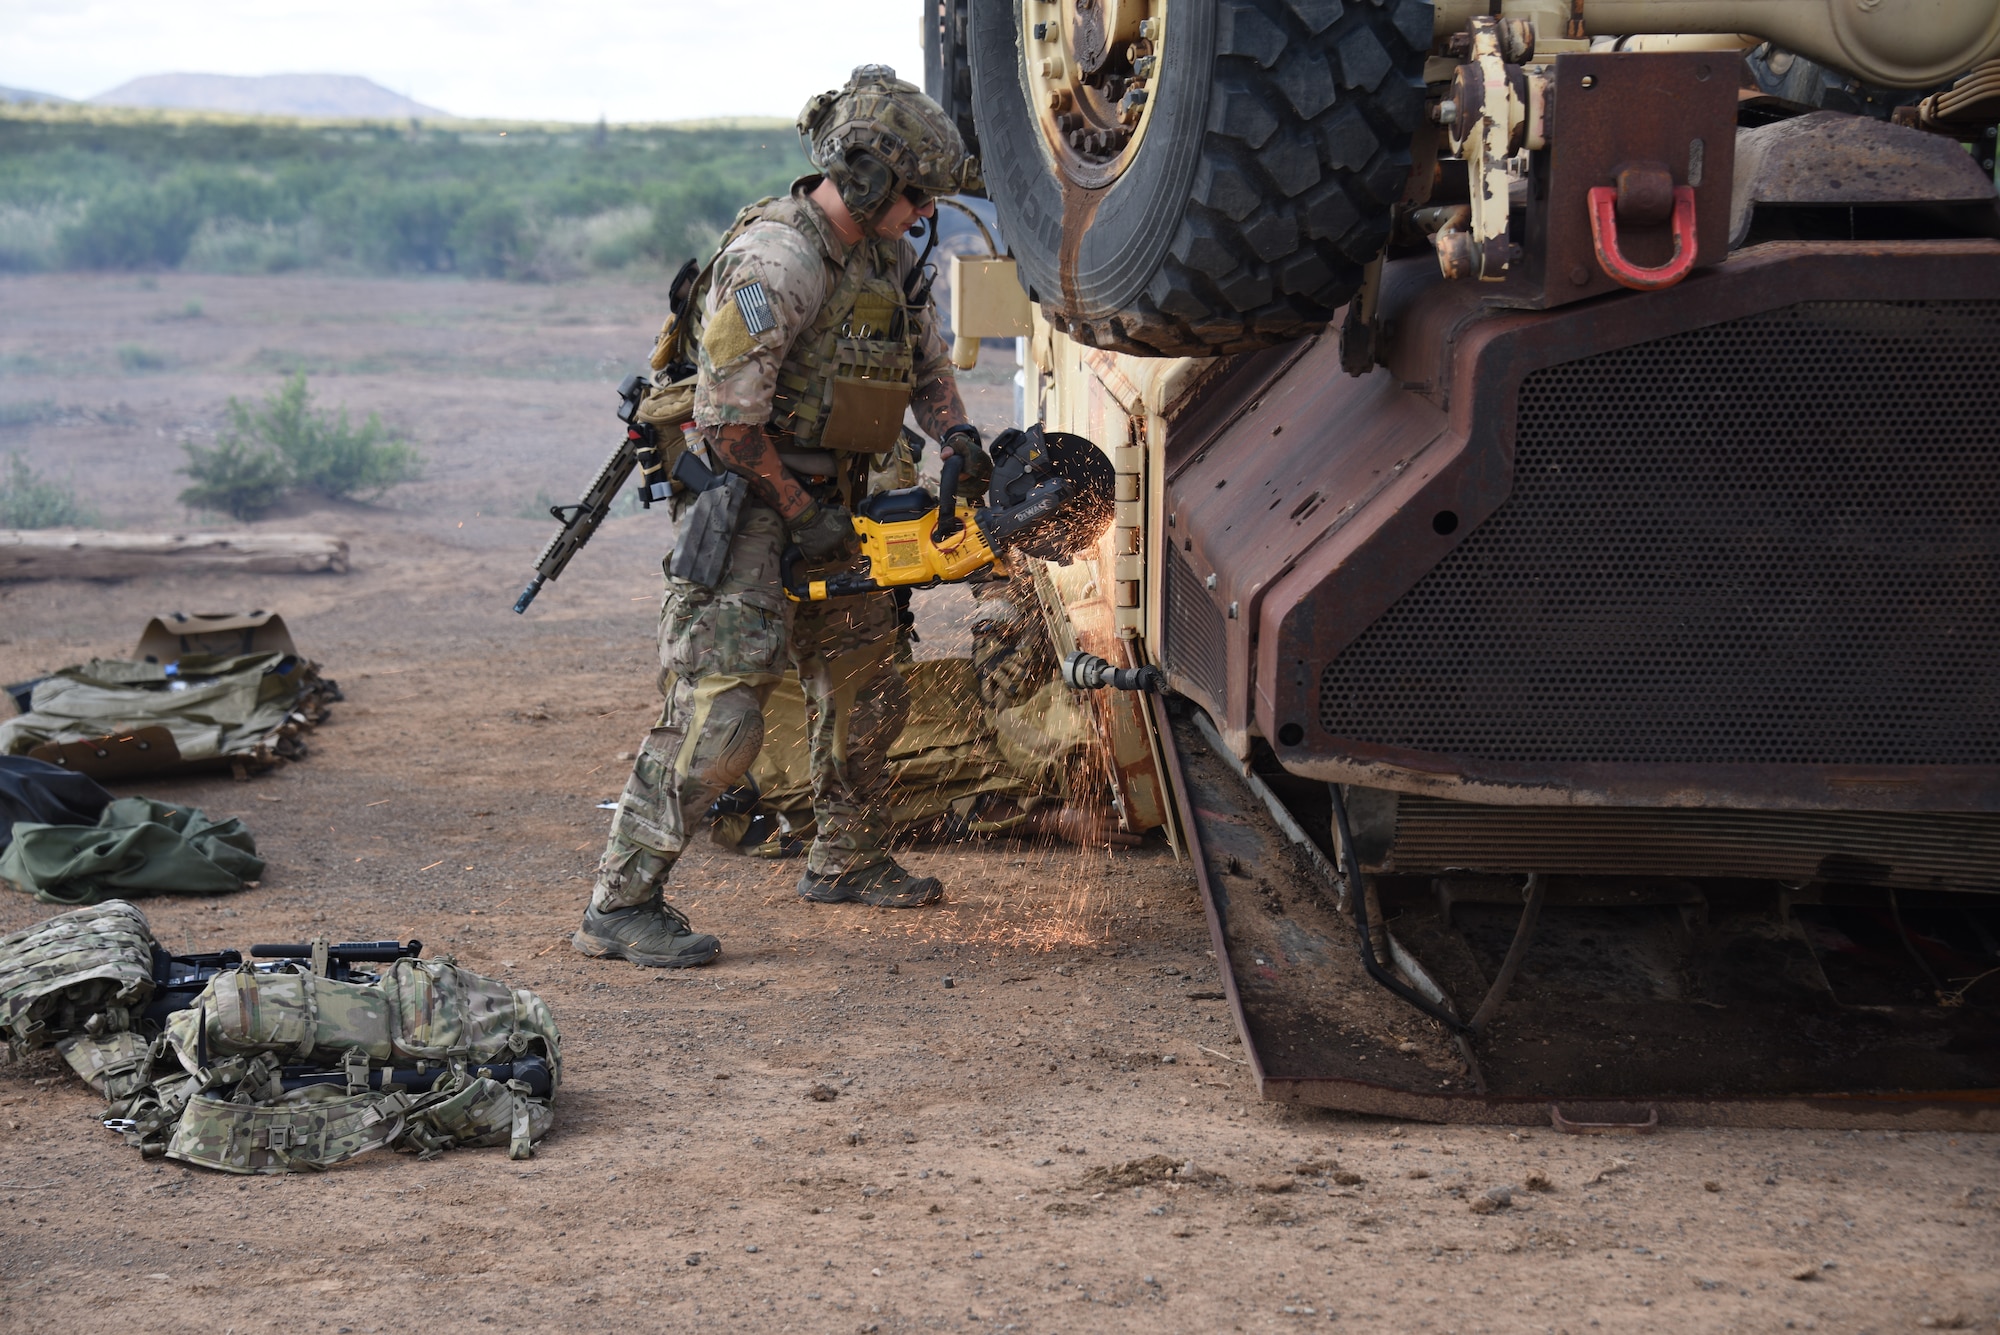 A photo of a pararescueman opening an overturned vehicle with a saw.